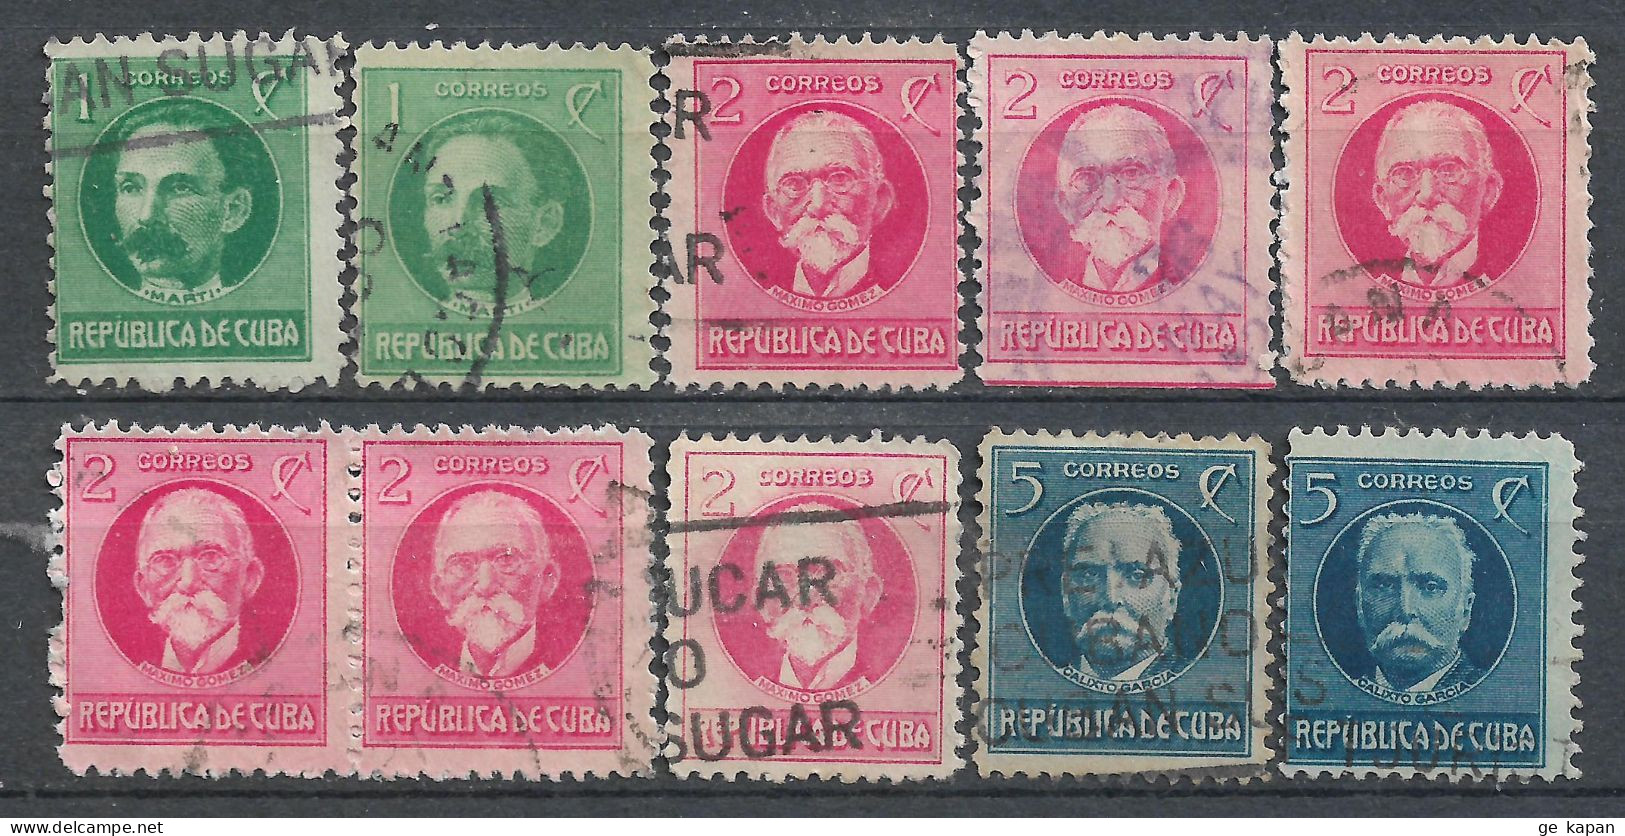 1925 CUBA Set Of 10 USED STAMPS (Michel # 48A,49A,51A) CV €3.00 - Usados